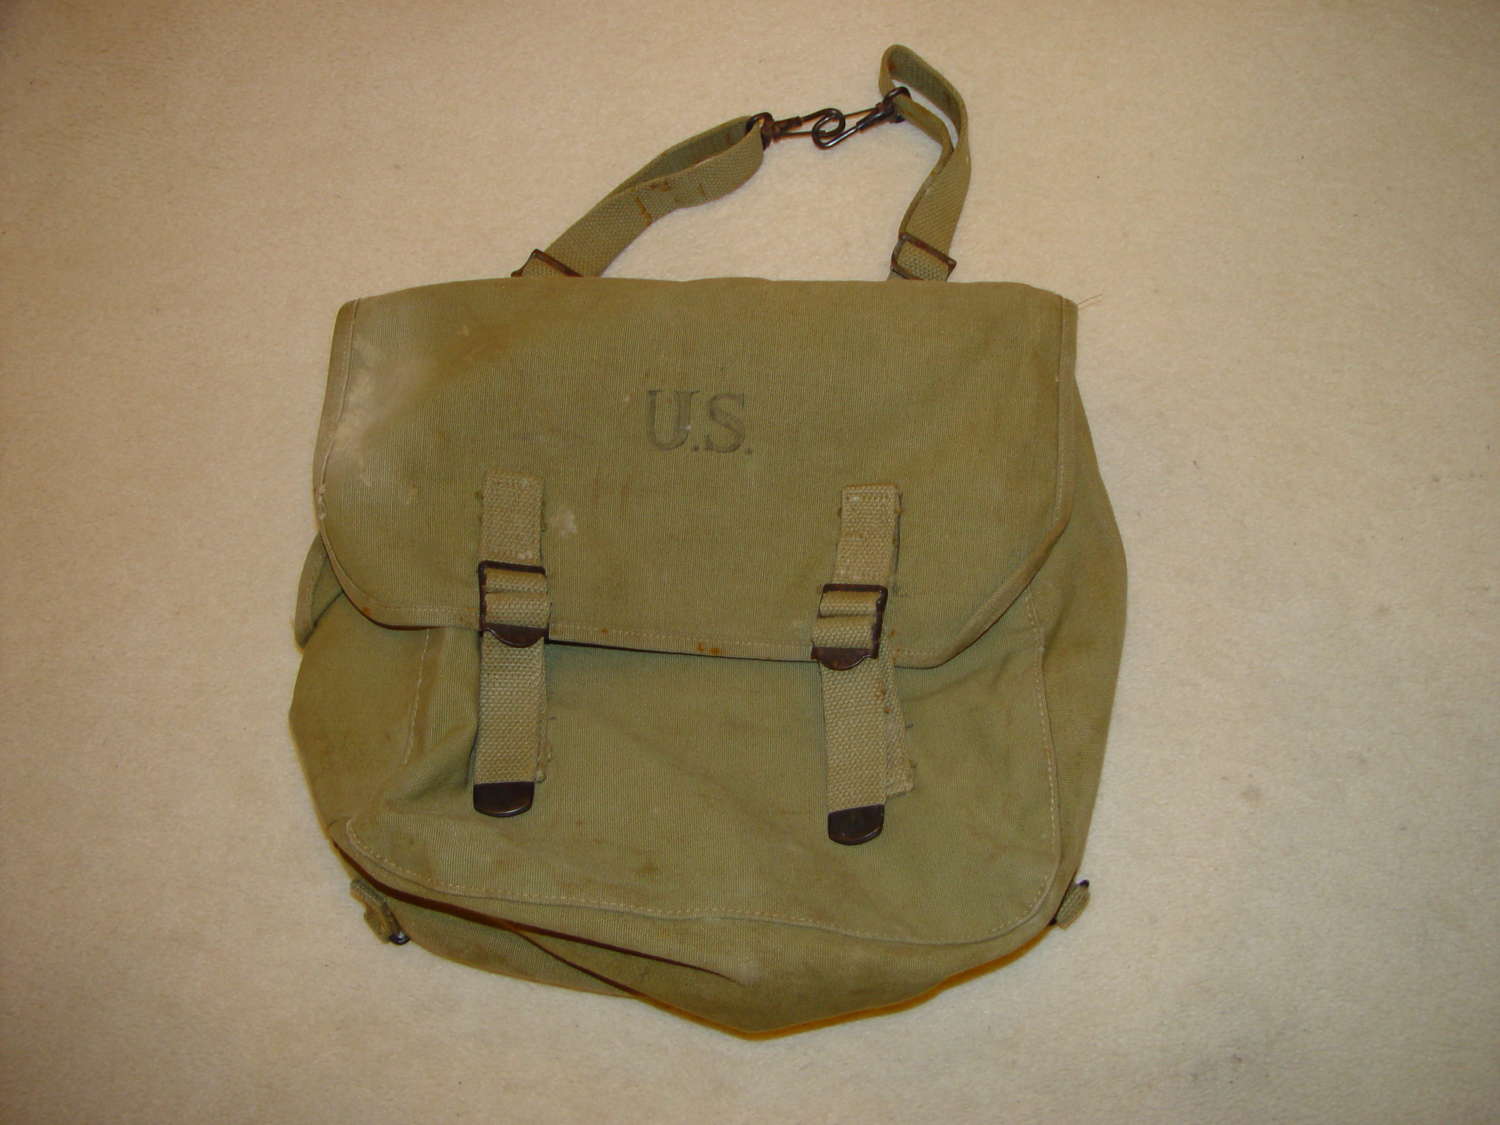 US Army musette bag